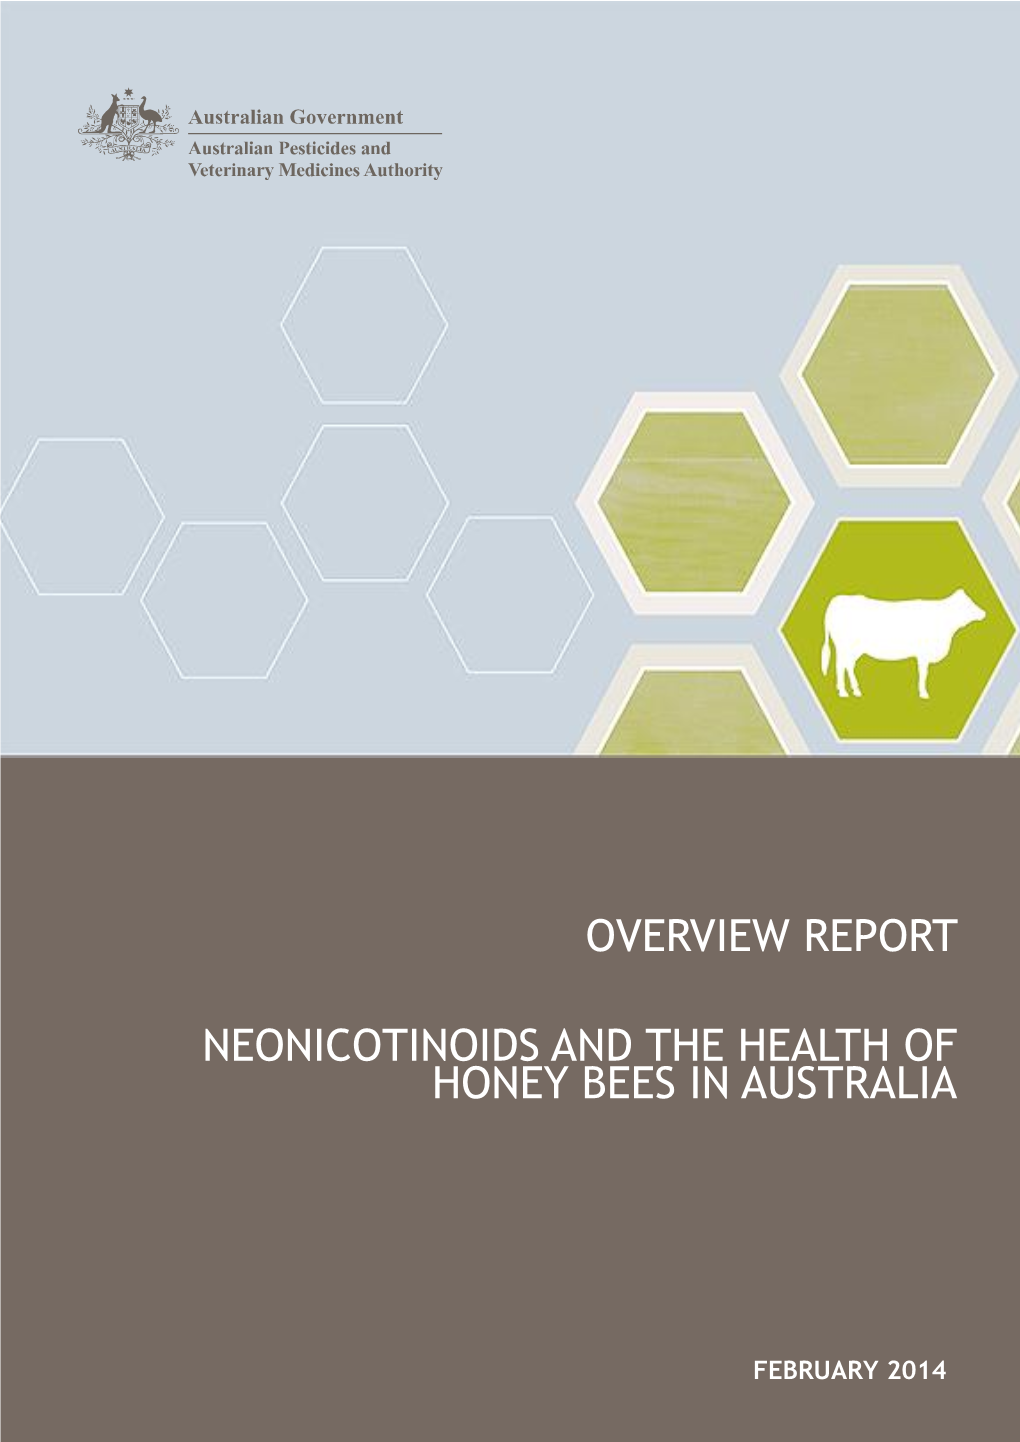 Neonicotinoids and the Health of Honey Bees in Australia